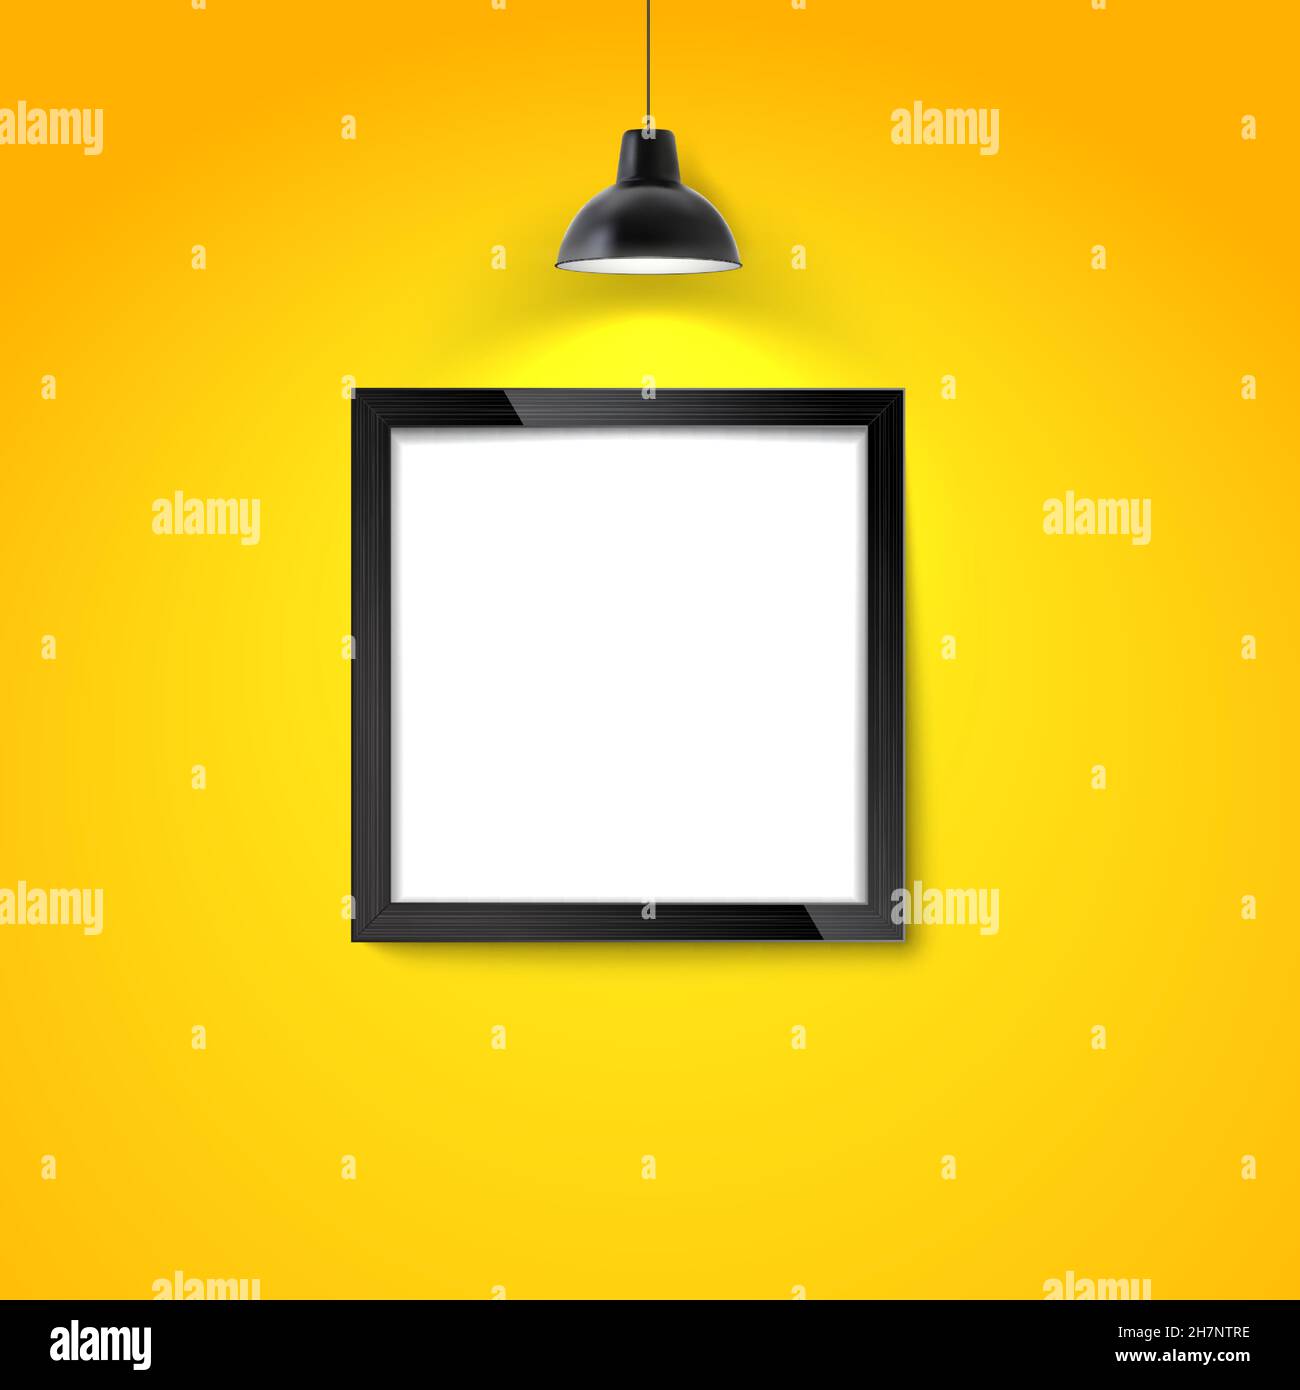 Picture frame on yellow wall with hanging lamp. Blank photo frame or poster template. Photo art gallery mockup. Stock Vector